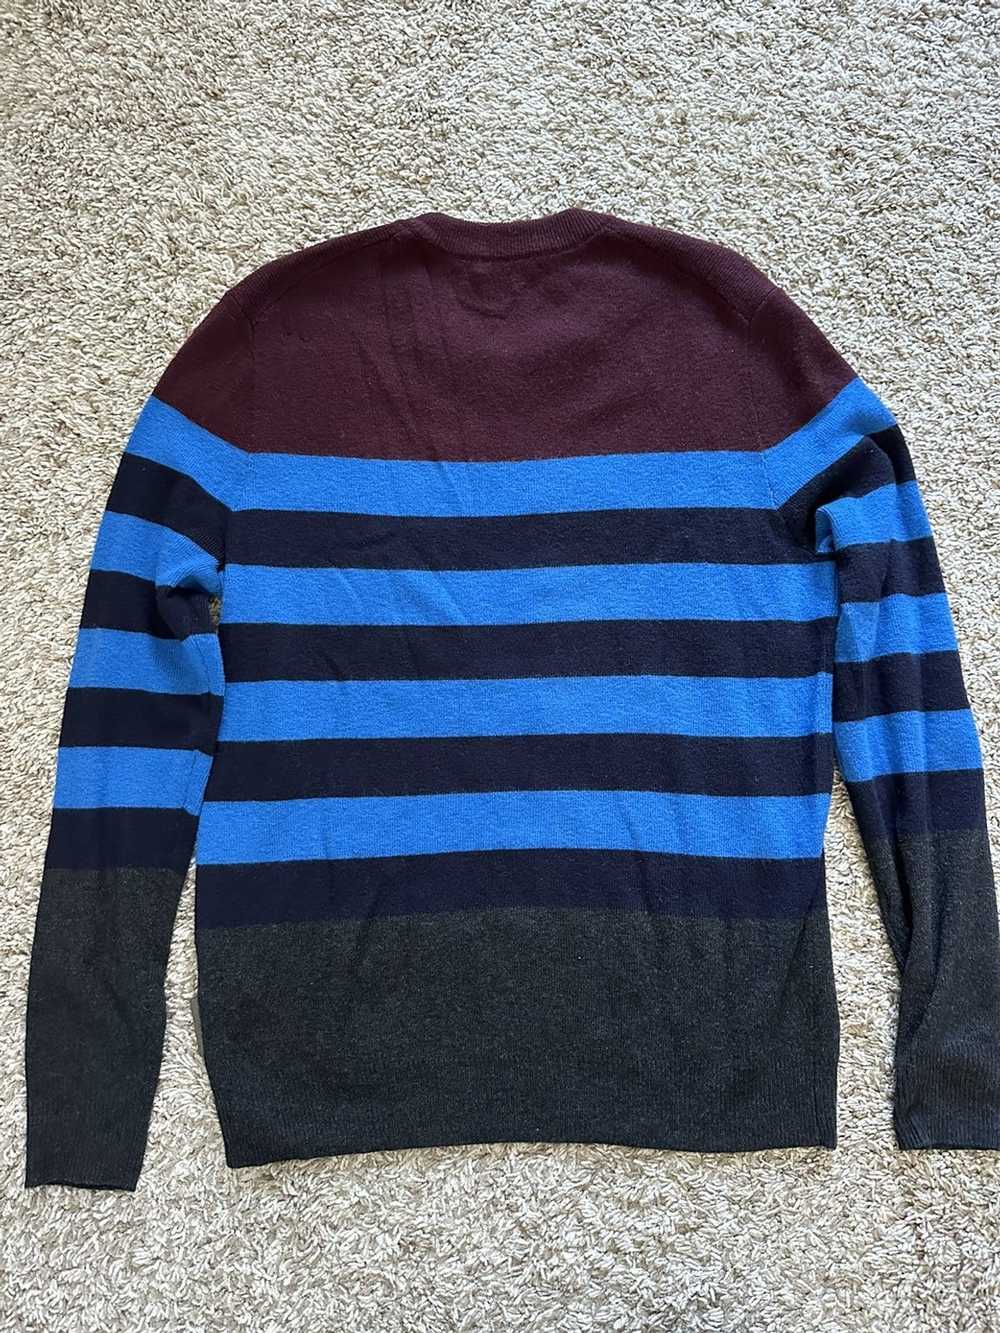 Burberry Burberry Brit Sweater Wool striped Small - image 5